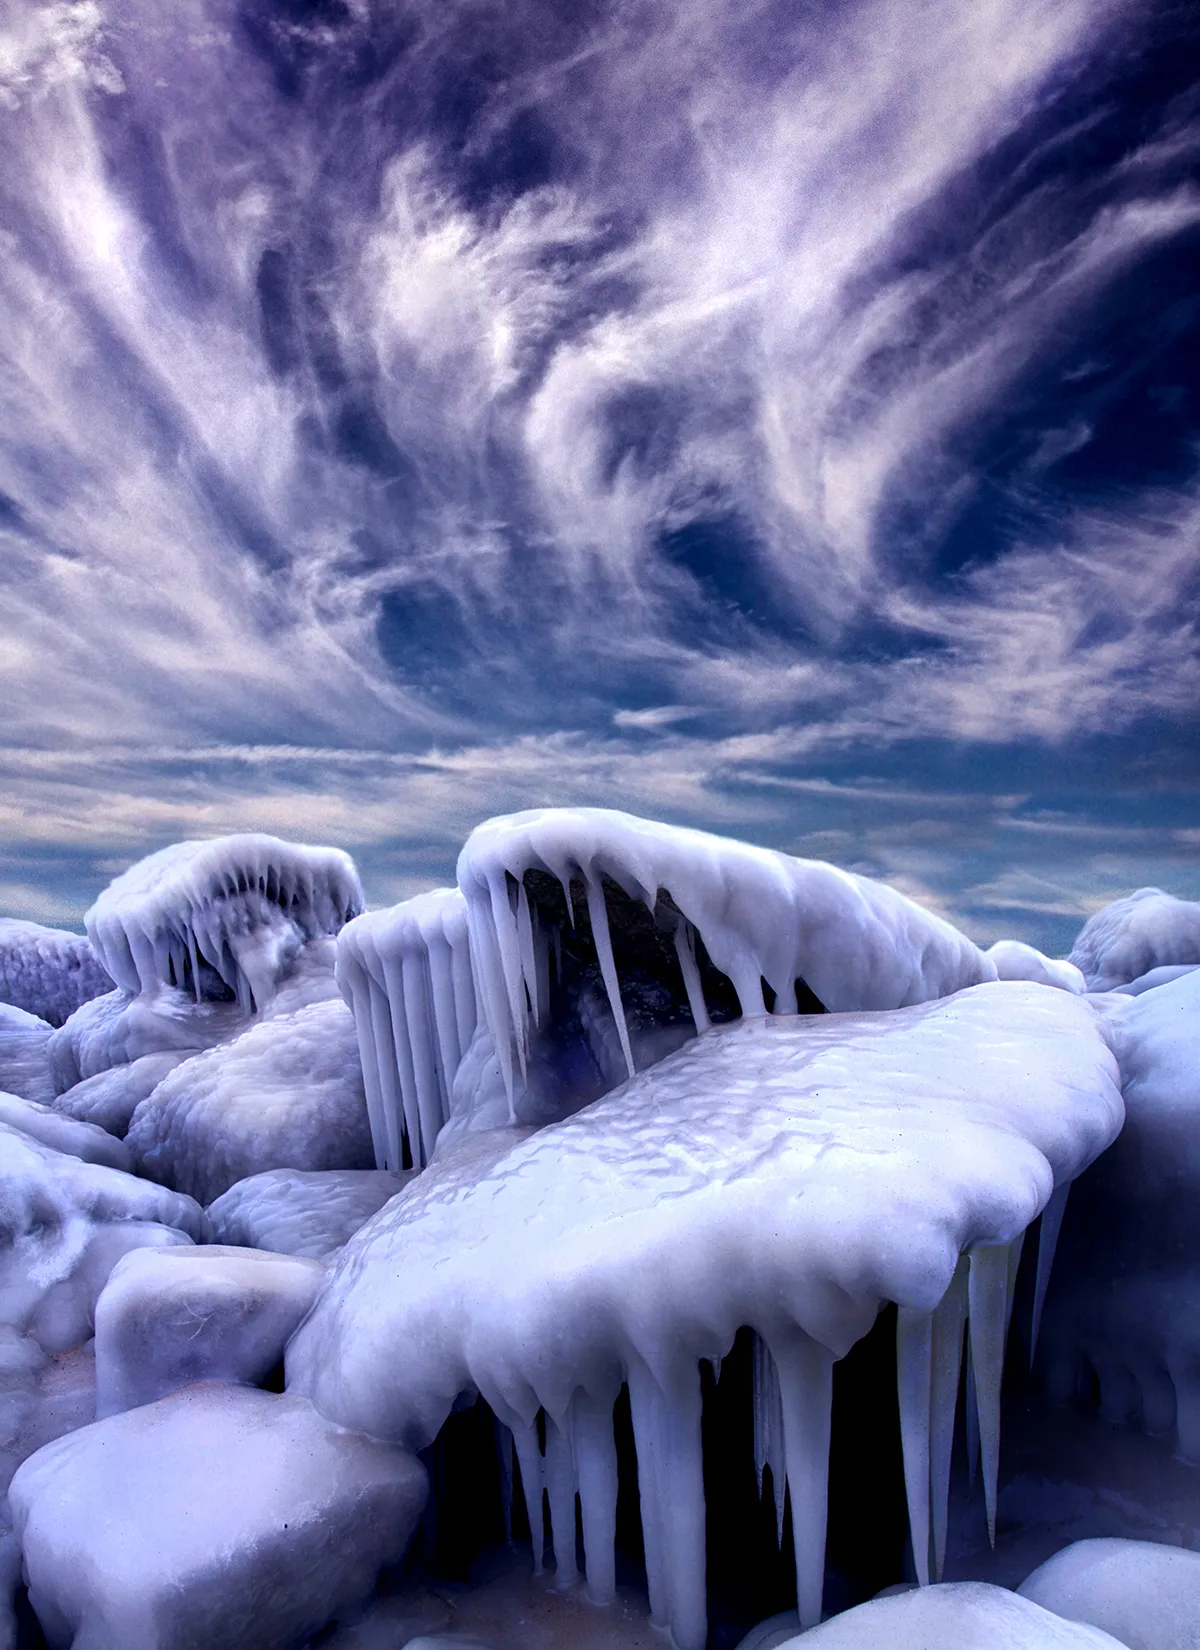 Extreme cold and wind-blown spray combine to create a spectacular ice-bound landscape on the shores of Lake Michigan in Wisconsin, USA. For ice formations to build up like this, a substantial period of sub-zero temperatures is required in order for the surface of the lake to freeze. The time lag between the onset of sub-zero air temperatures and the freezing of the lake is due to the large heat capacity of water – a great deal of energy must be lost to the surroundings in order for the temperature of the lake to decrease appreciably, and so the lake cools much more slowly than the surrounding land surface and overlying air. Early in the winter, when the lake is still ice-free, but air temperatures are already well below freezing, waves crashing onto the shore create spray that freezes quickly on contact with objects near the shoreline. Photo by Phil Kock